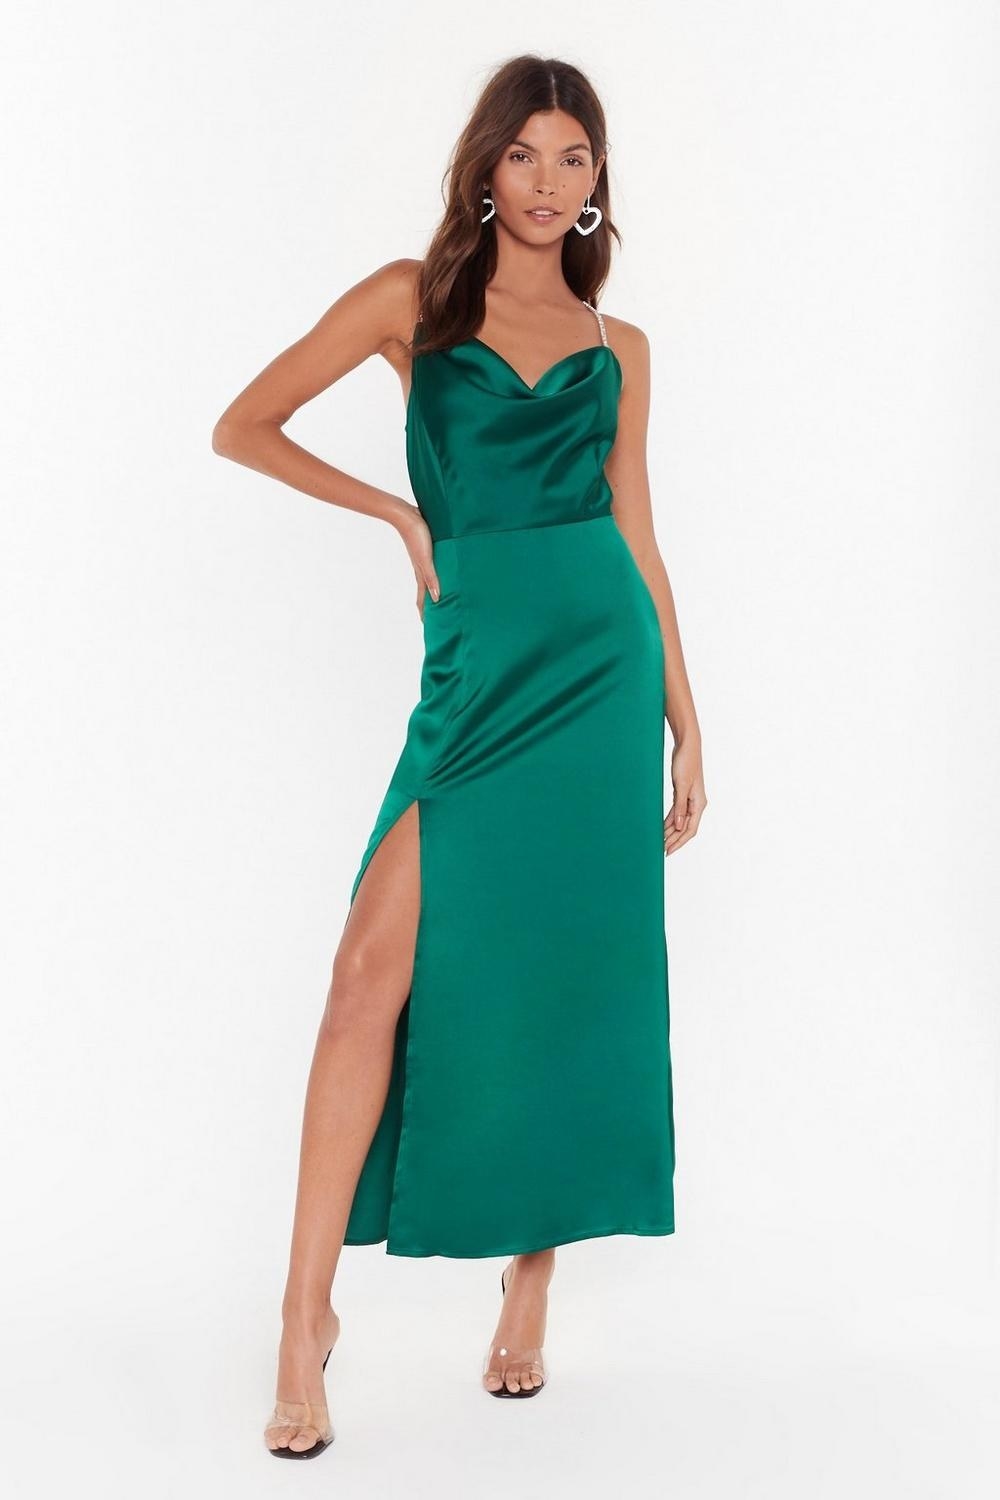 38 Gorgeous (And Inexpensive) Dresses To Wear To A Fall Wedding